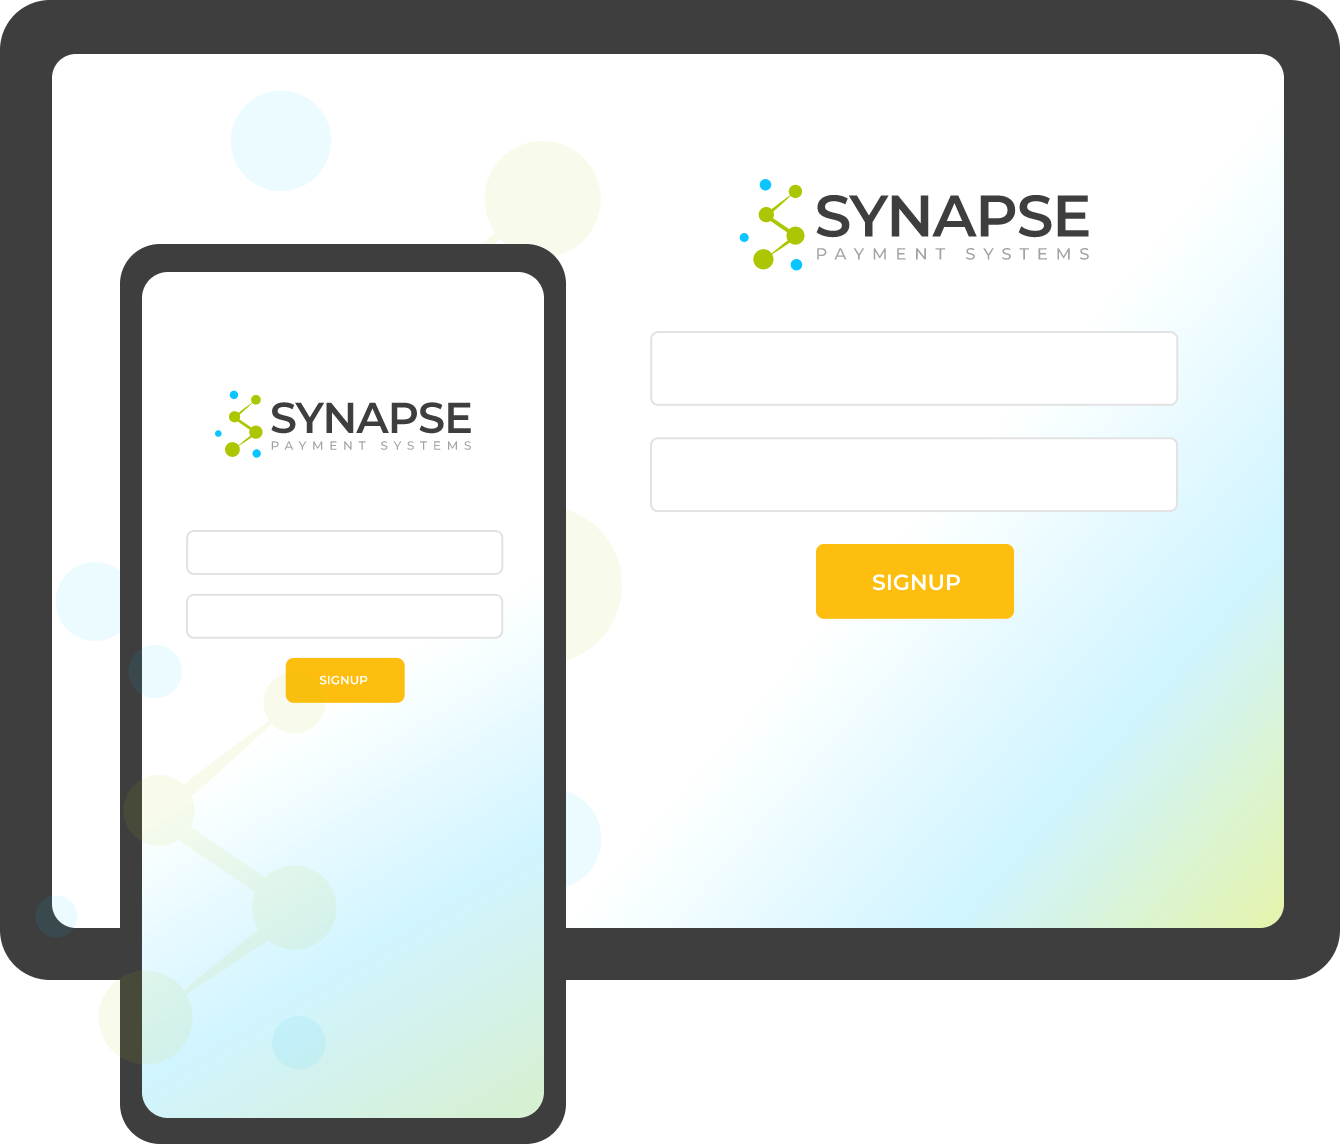 Synapse company login form on a phone and a tablet